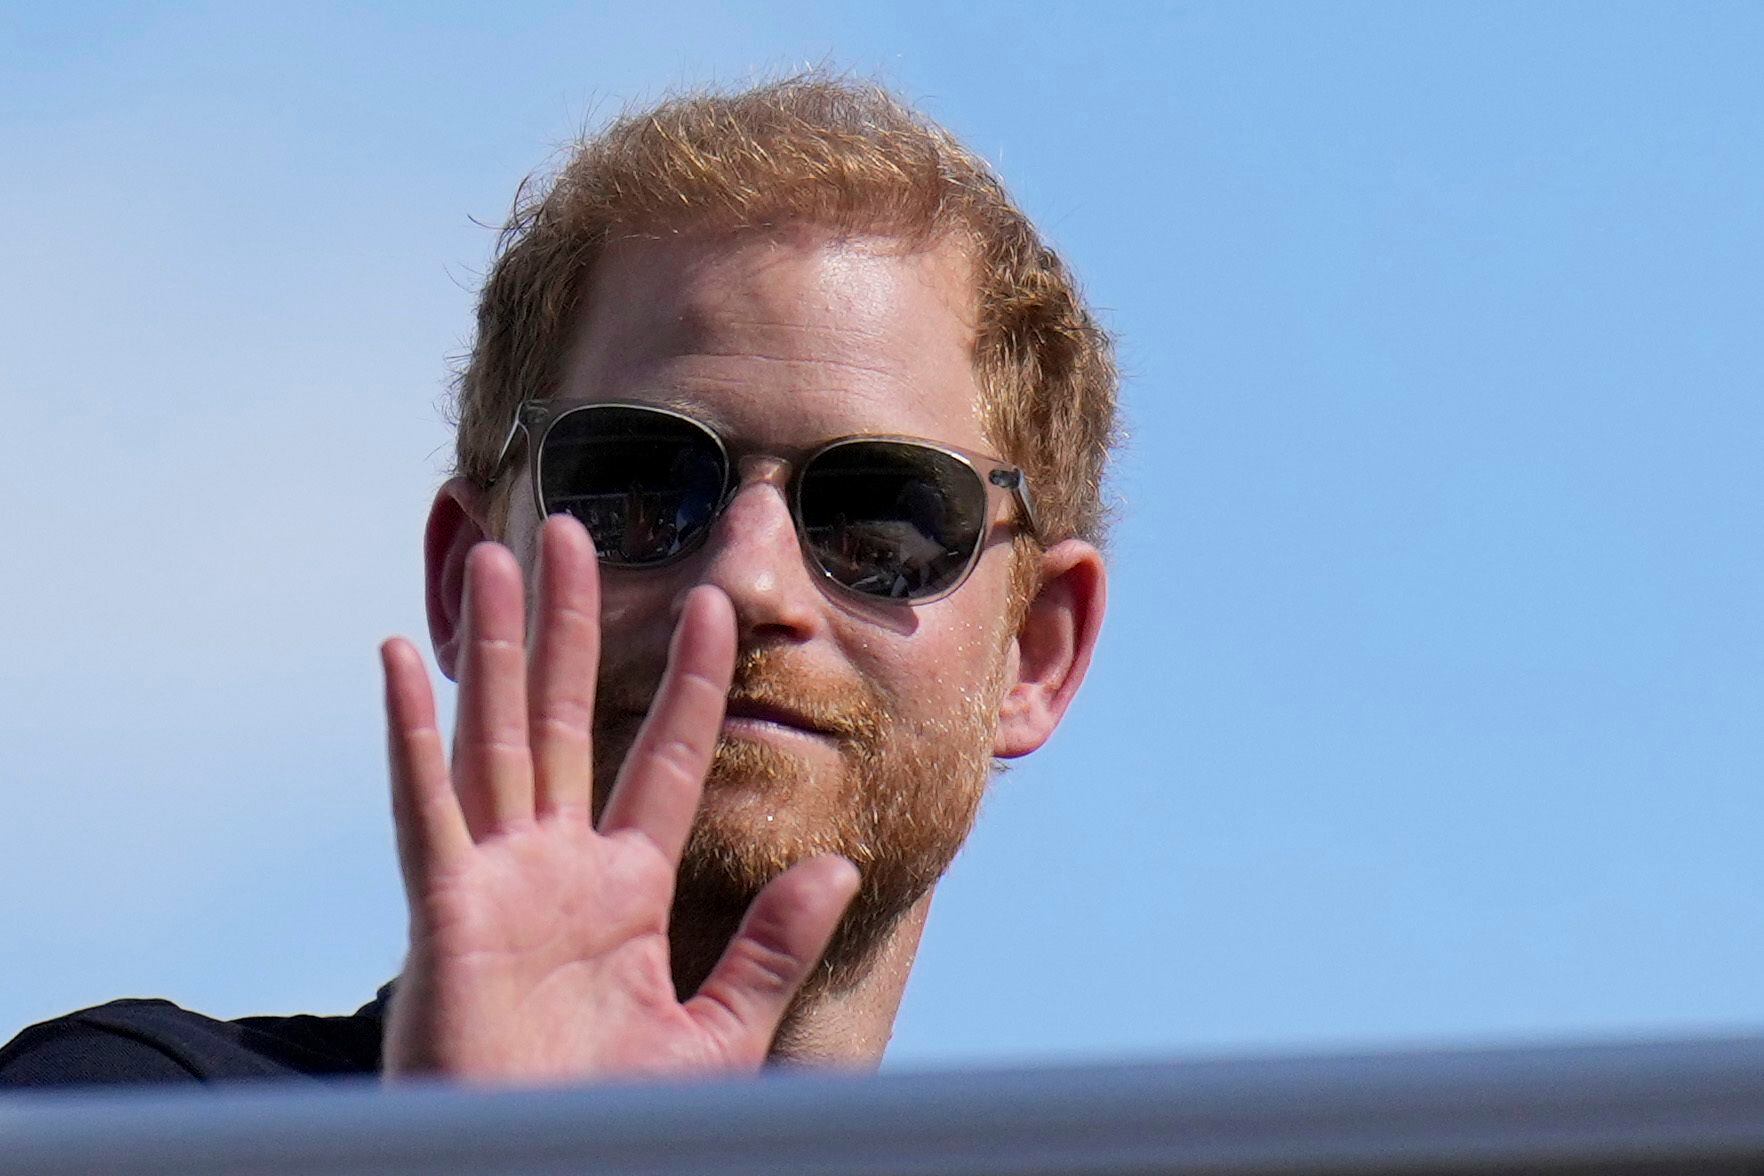 FILE - Britain's Prince Harry, the Duke of Sussex, waves during the Formula One U.S. Grand Prix auto race at Circuit of the Americas, on Oct. 22, 2023, in Austin, Texas. Prince Harry, the son of King Charles III and fifth in line to the British throne, has formally confirmed his is now a U.S. resident. Four years after Harry and his American wife, Meghan, decamped to a villa on the Southern California coast, a travel company he controls filed paperwork informing British authorities that he has moved and is now “usually resident” in the United States.